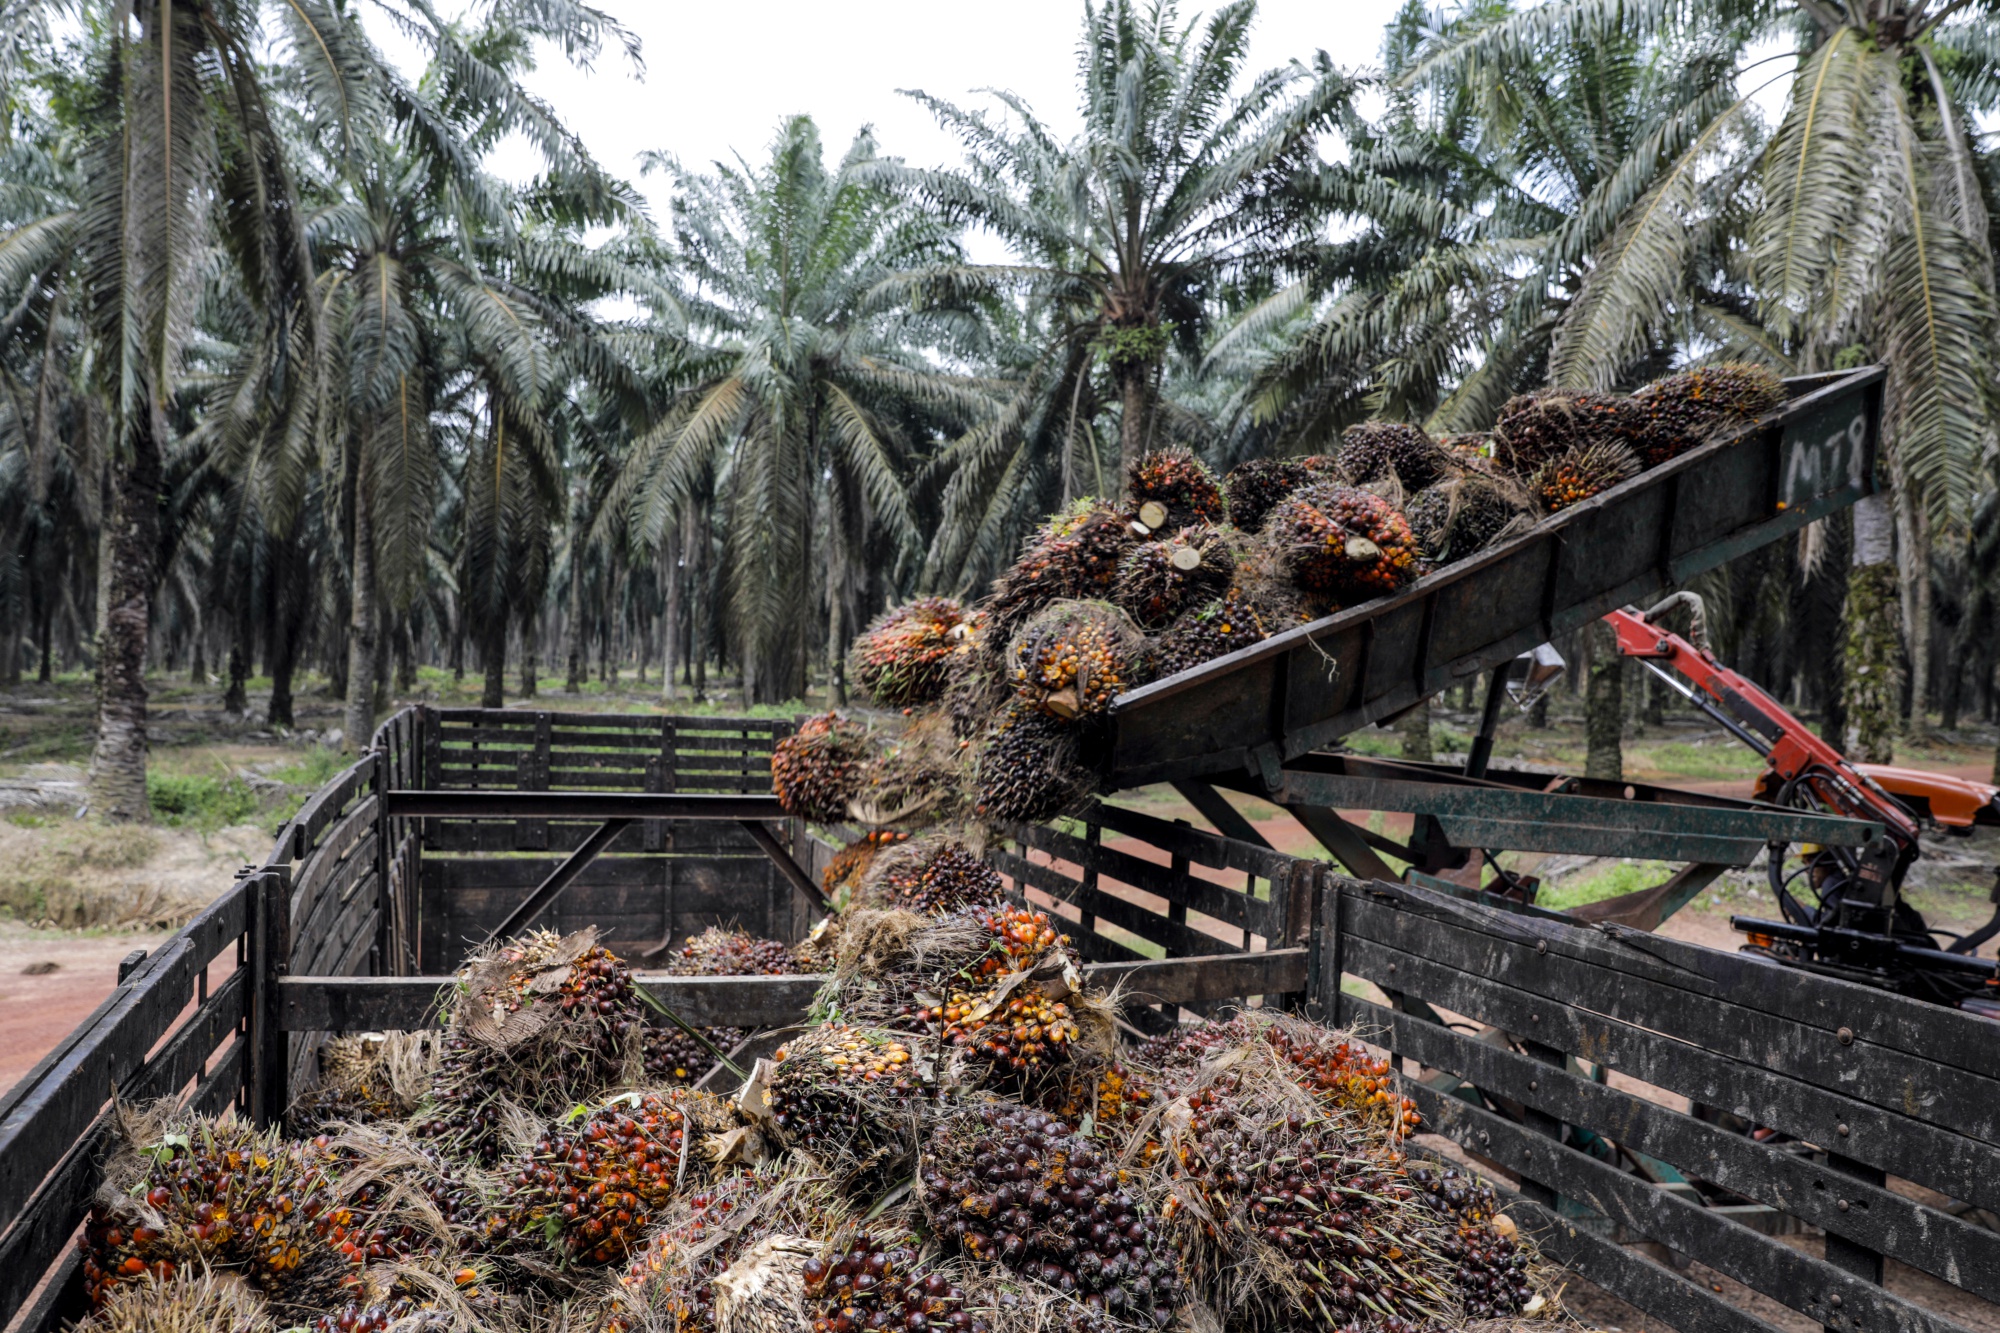 Palm oil production in Indonesia - Wikipedia